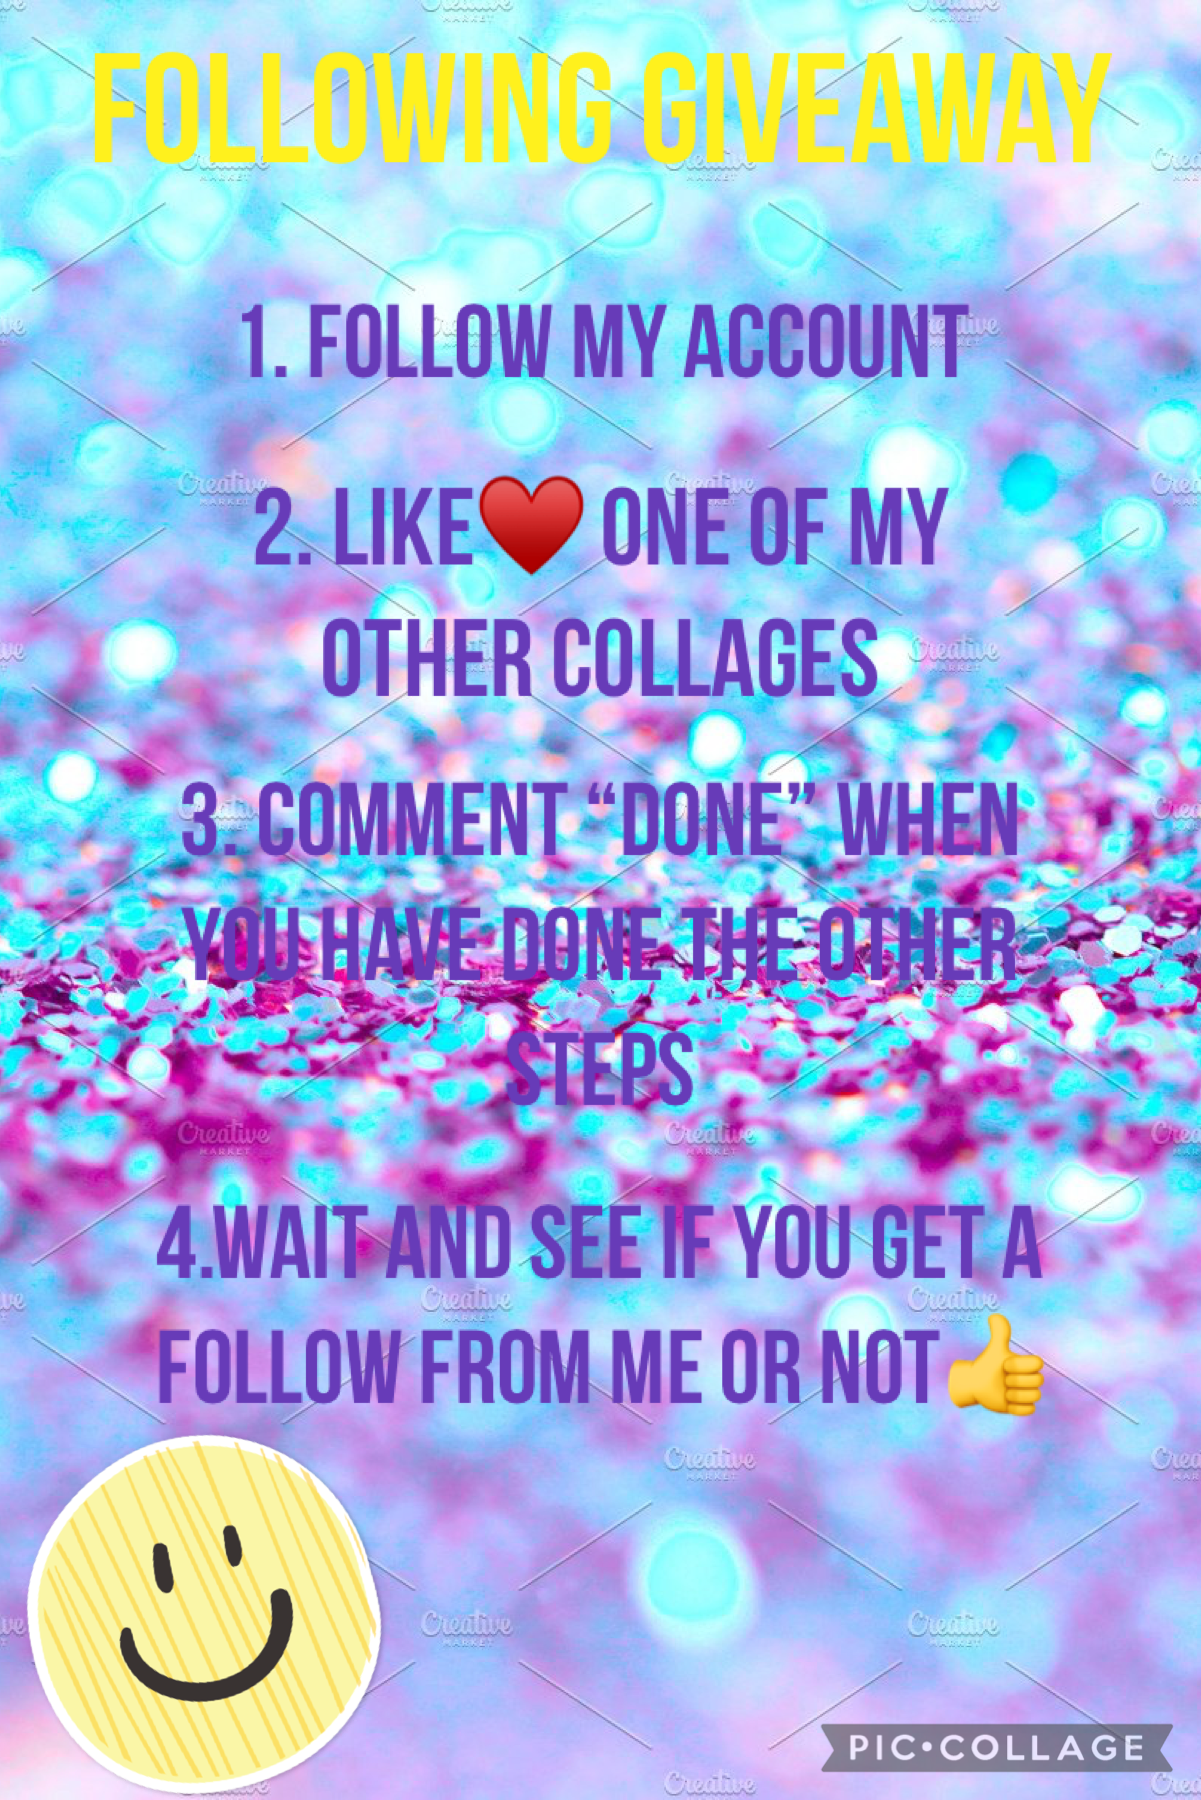 Press for info.
Follow my Account. Like♥️ one of my other collages. Comment “Done” when you have done the other steps. Wait and see if you get a follow from me. There will be “3” winners.